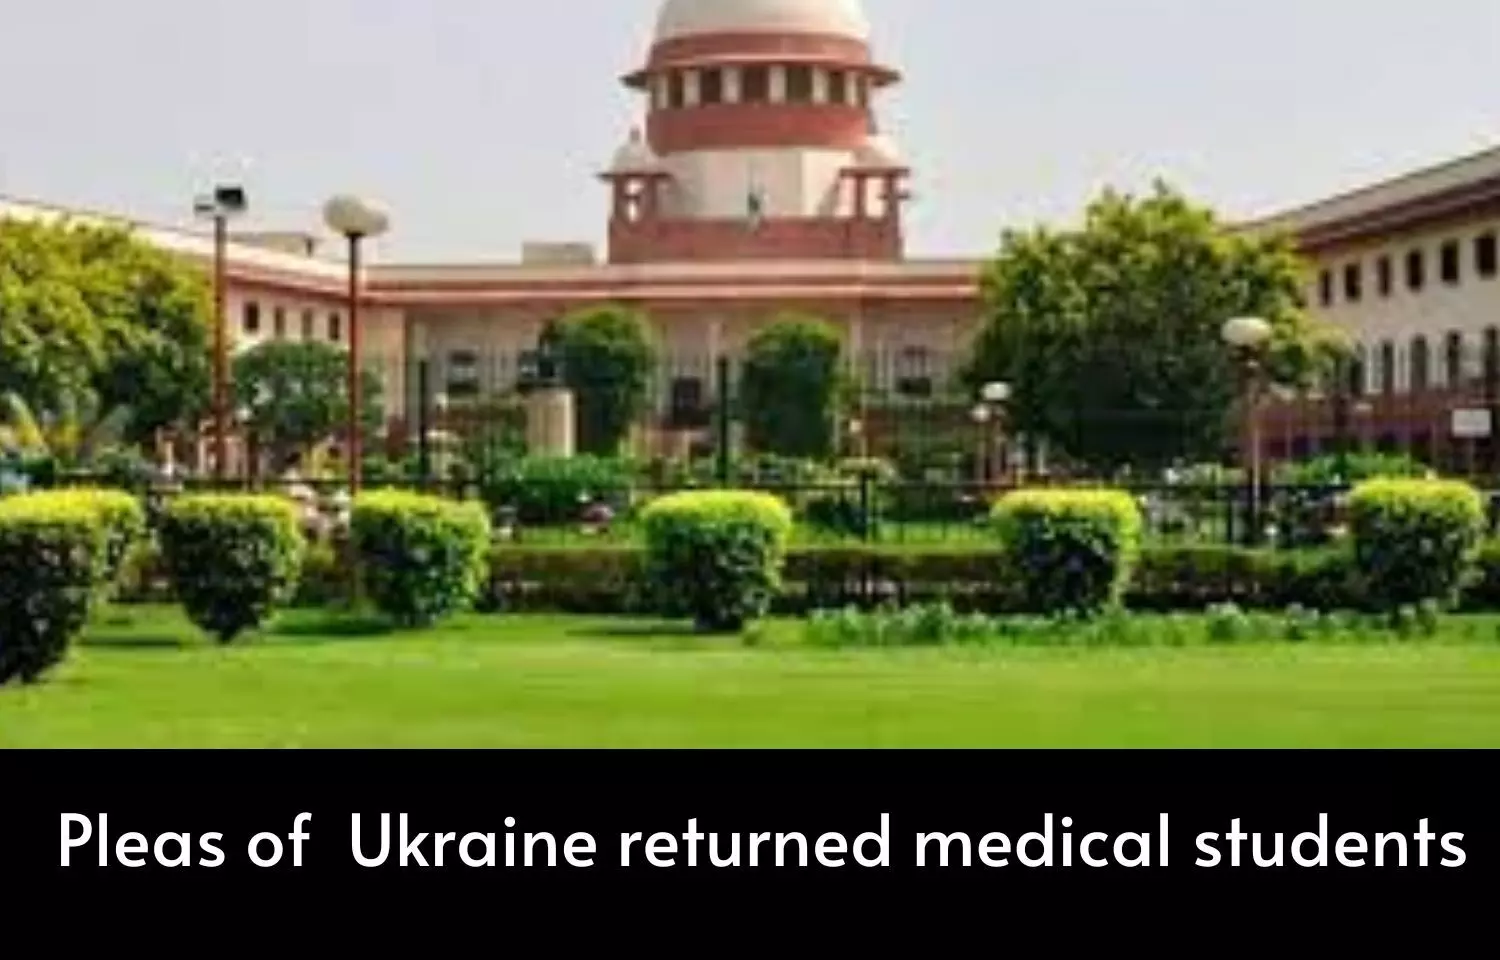 SC issues notice to NMC on Ukraine returned students pleas seeking accommodation in Indian Medical Colleges